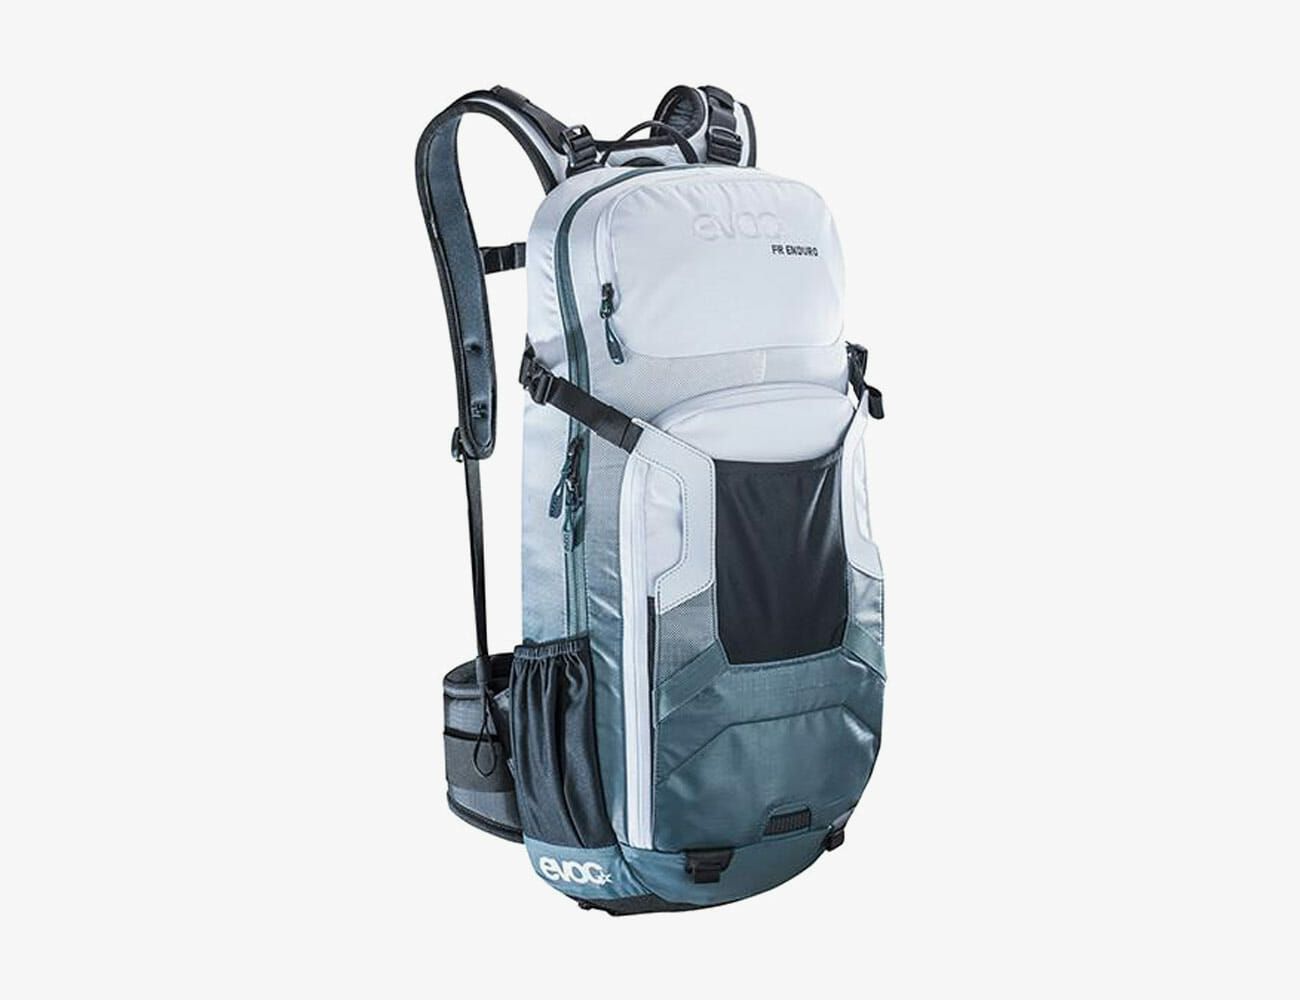 best hydration pack for hiking 2019